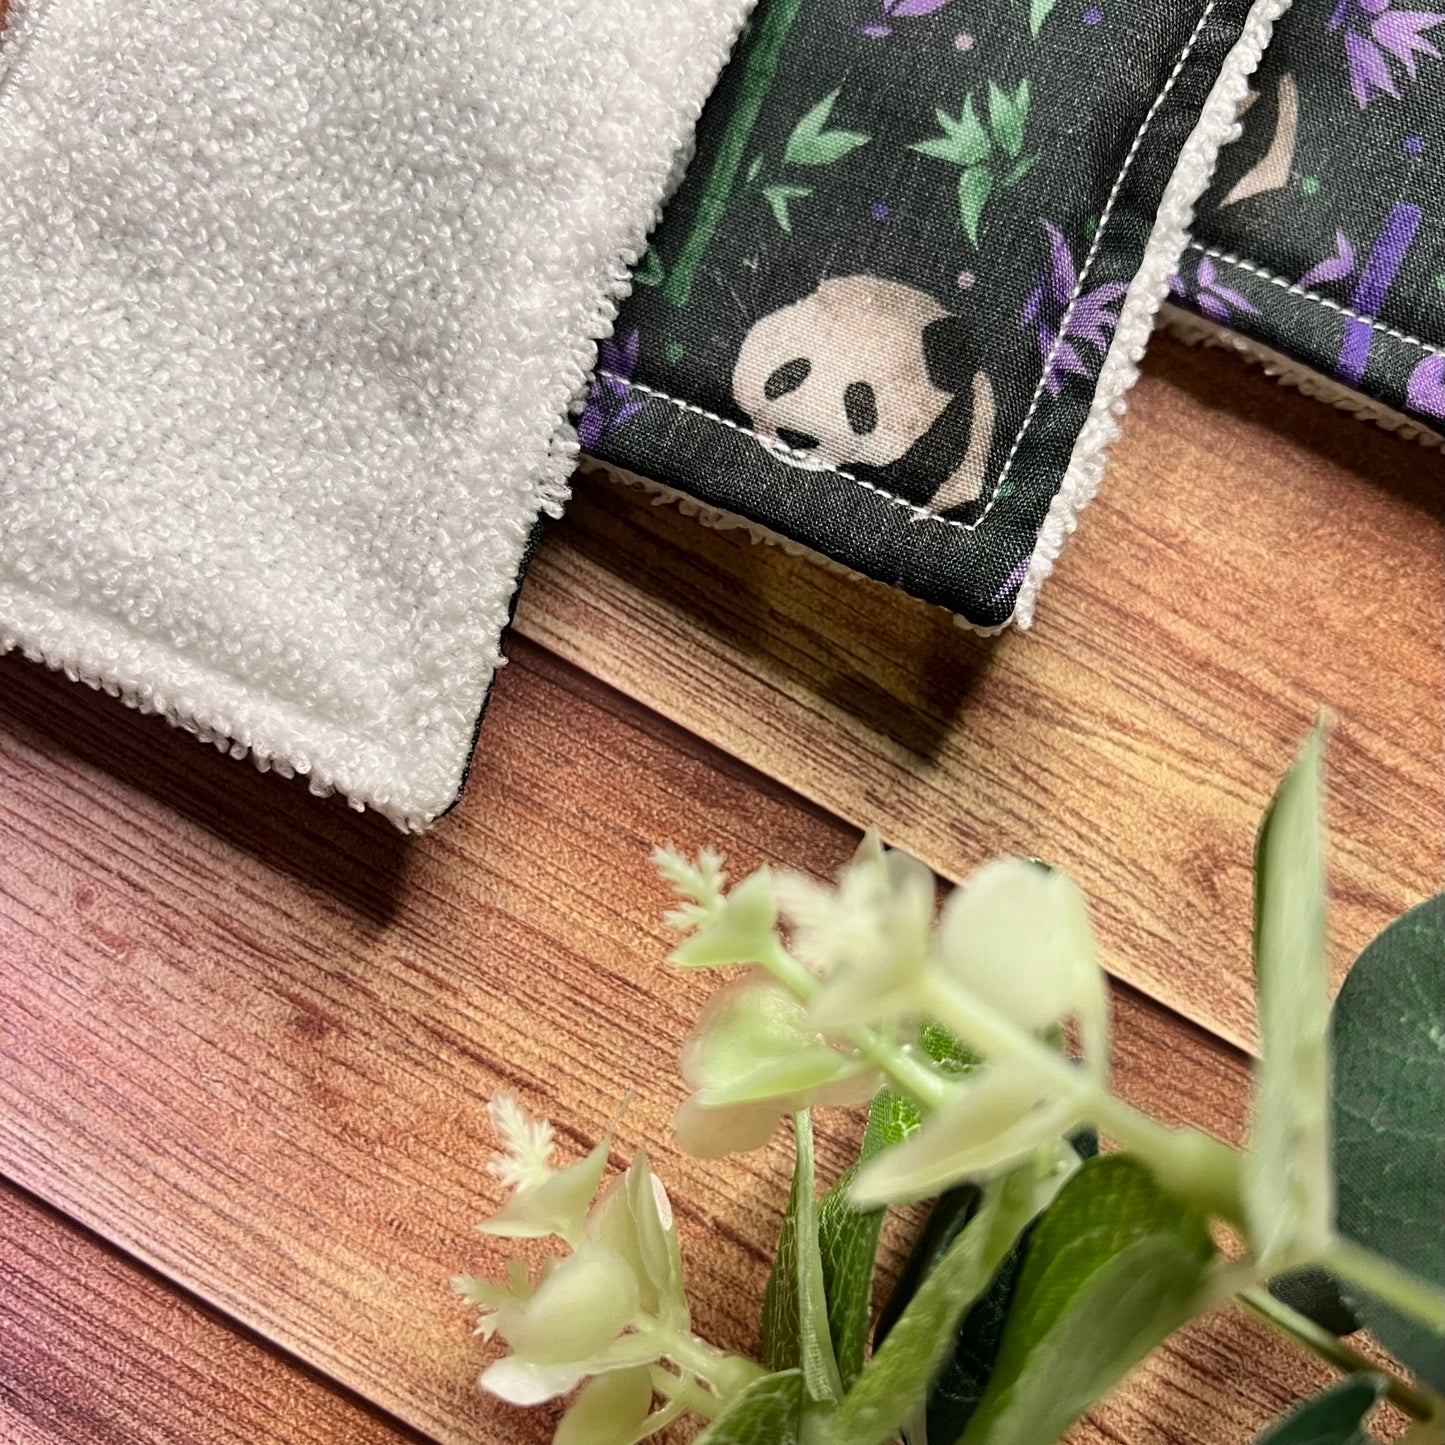 shop our panda gift ideas here with these panda exfoliating face pads. These make a great panda gift for a girlfriend.